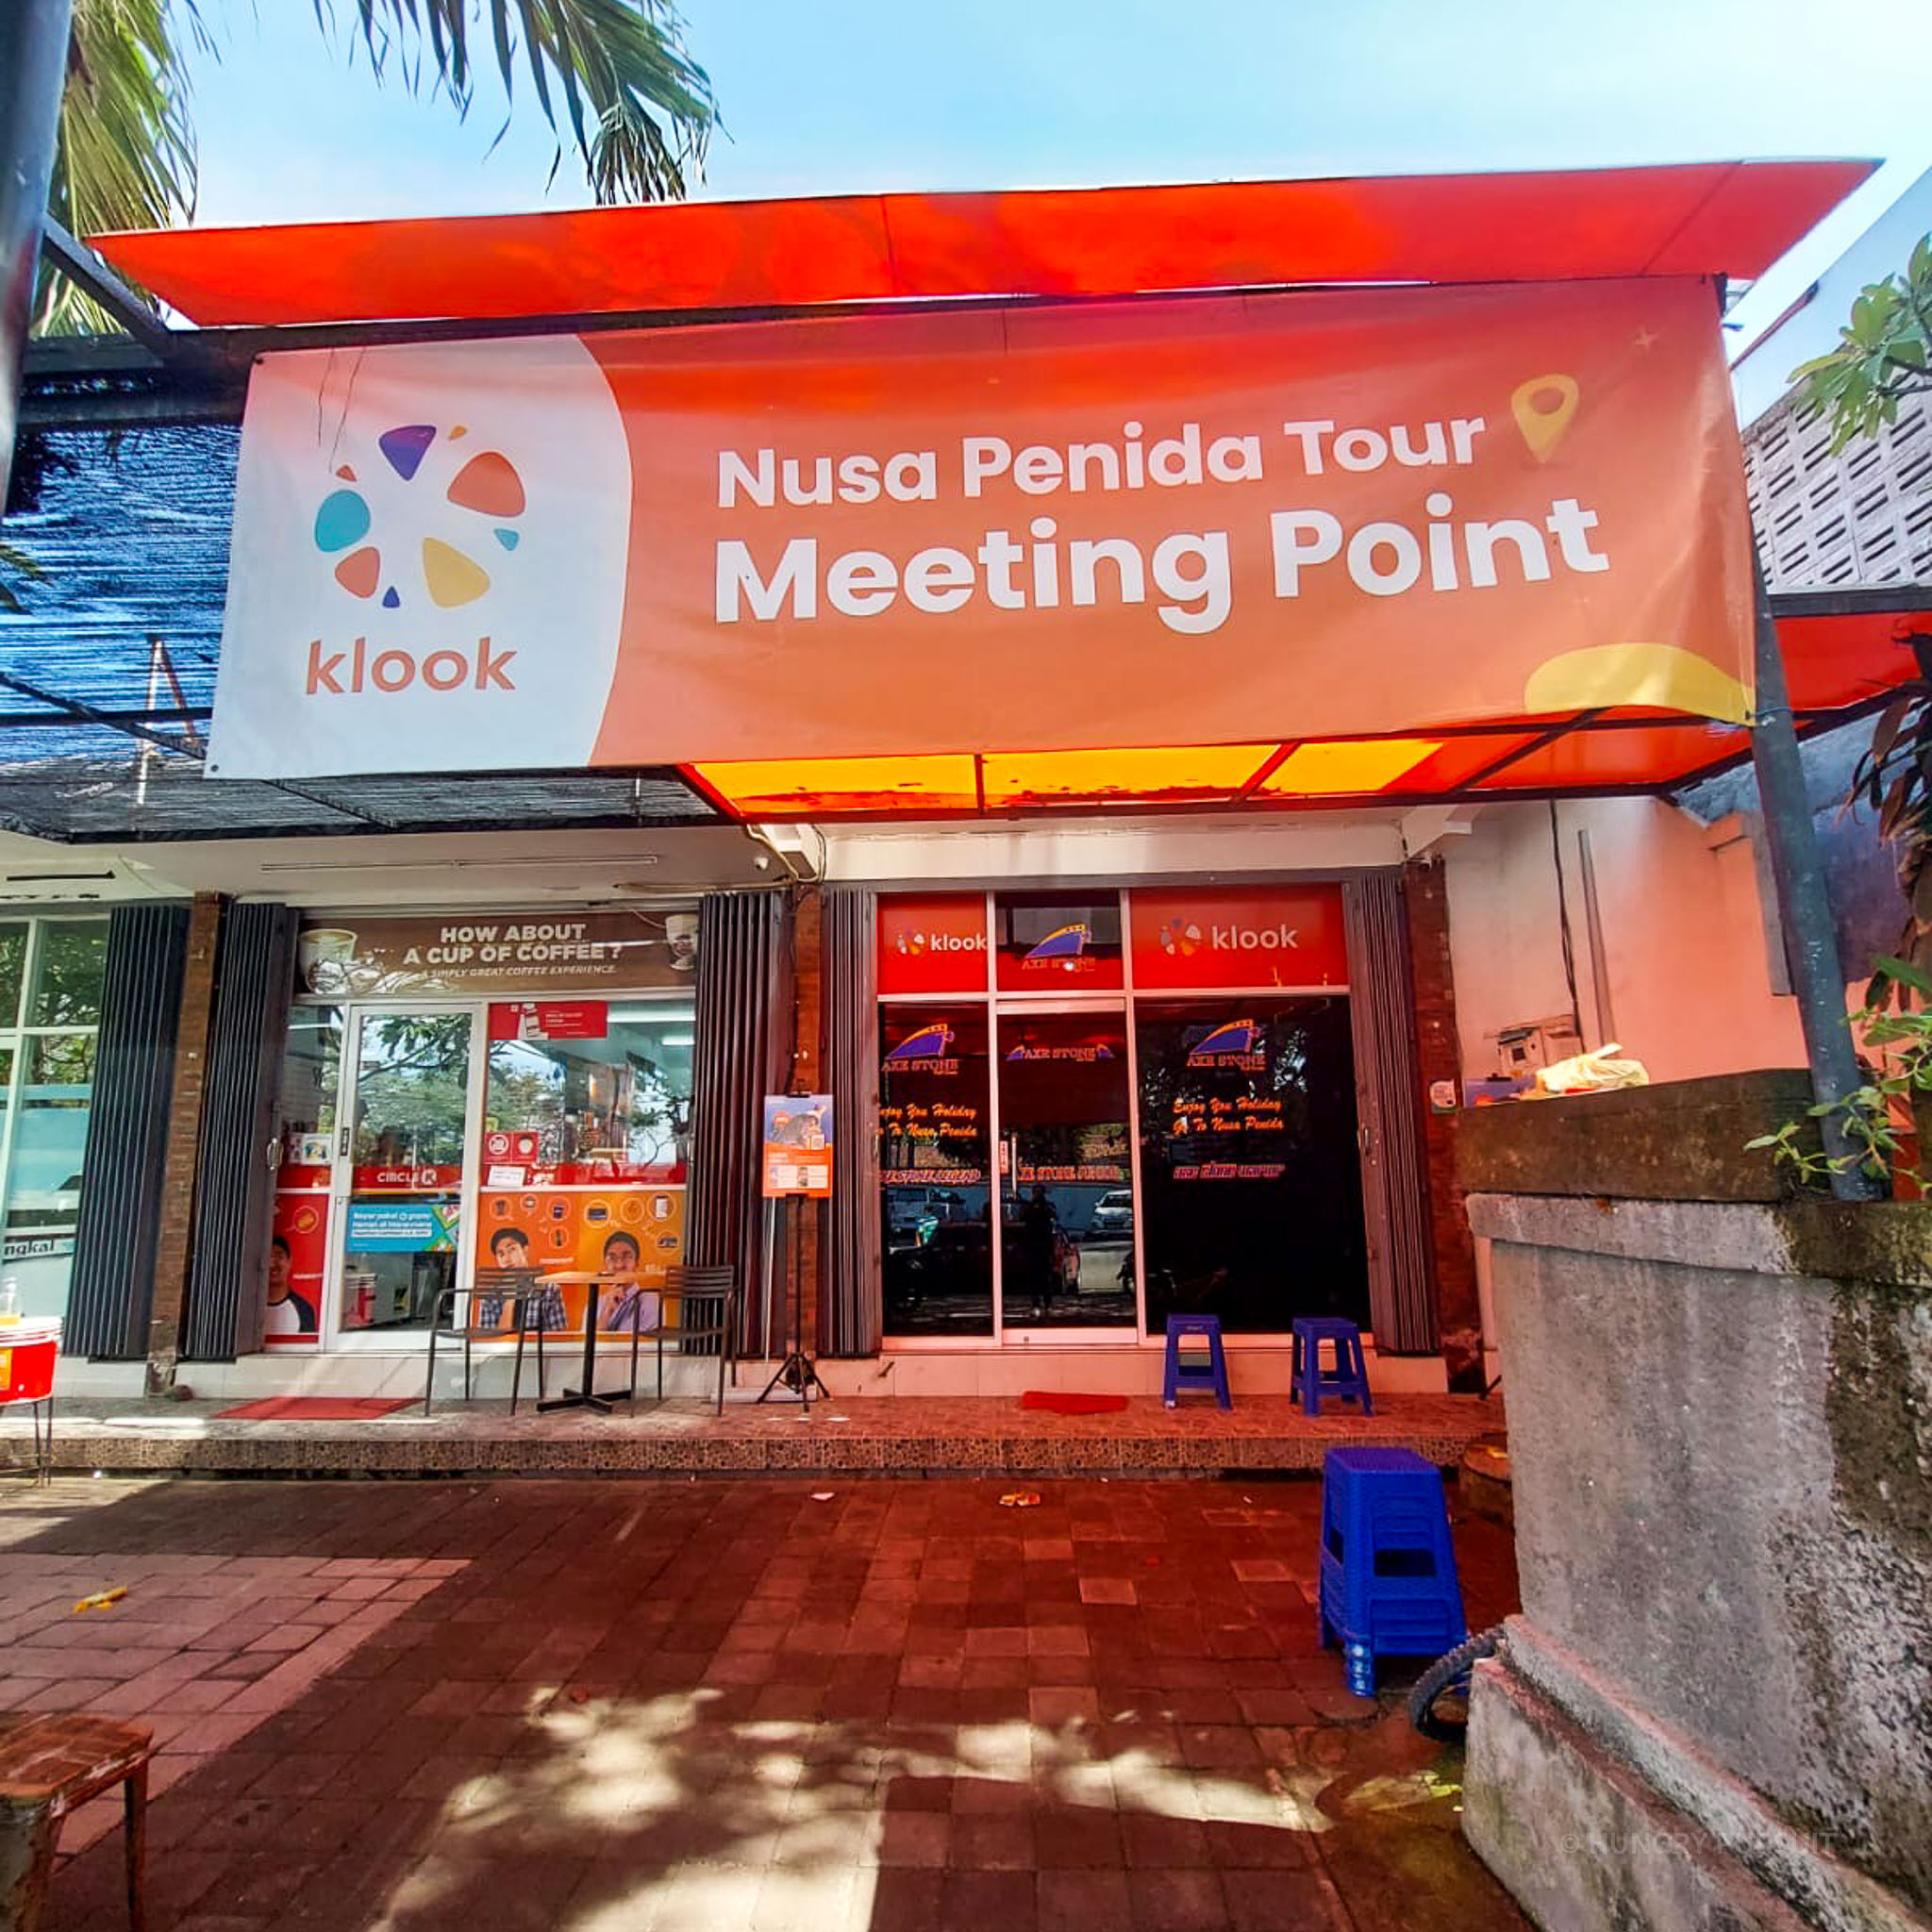 How to get from Bali to Nusa Penida Sanur Port Klook Meeting Point